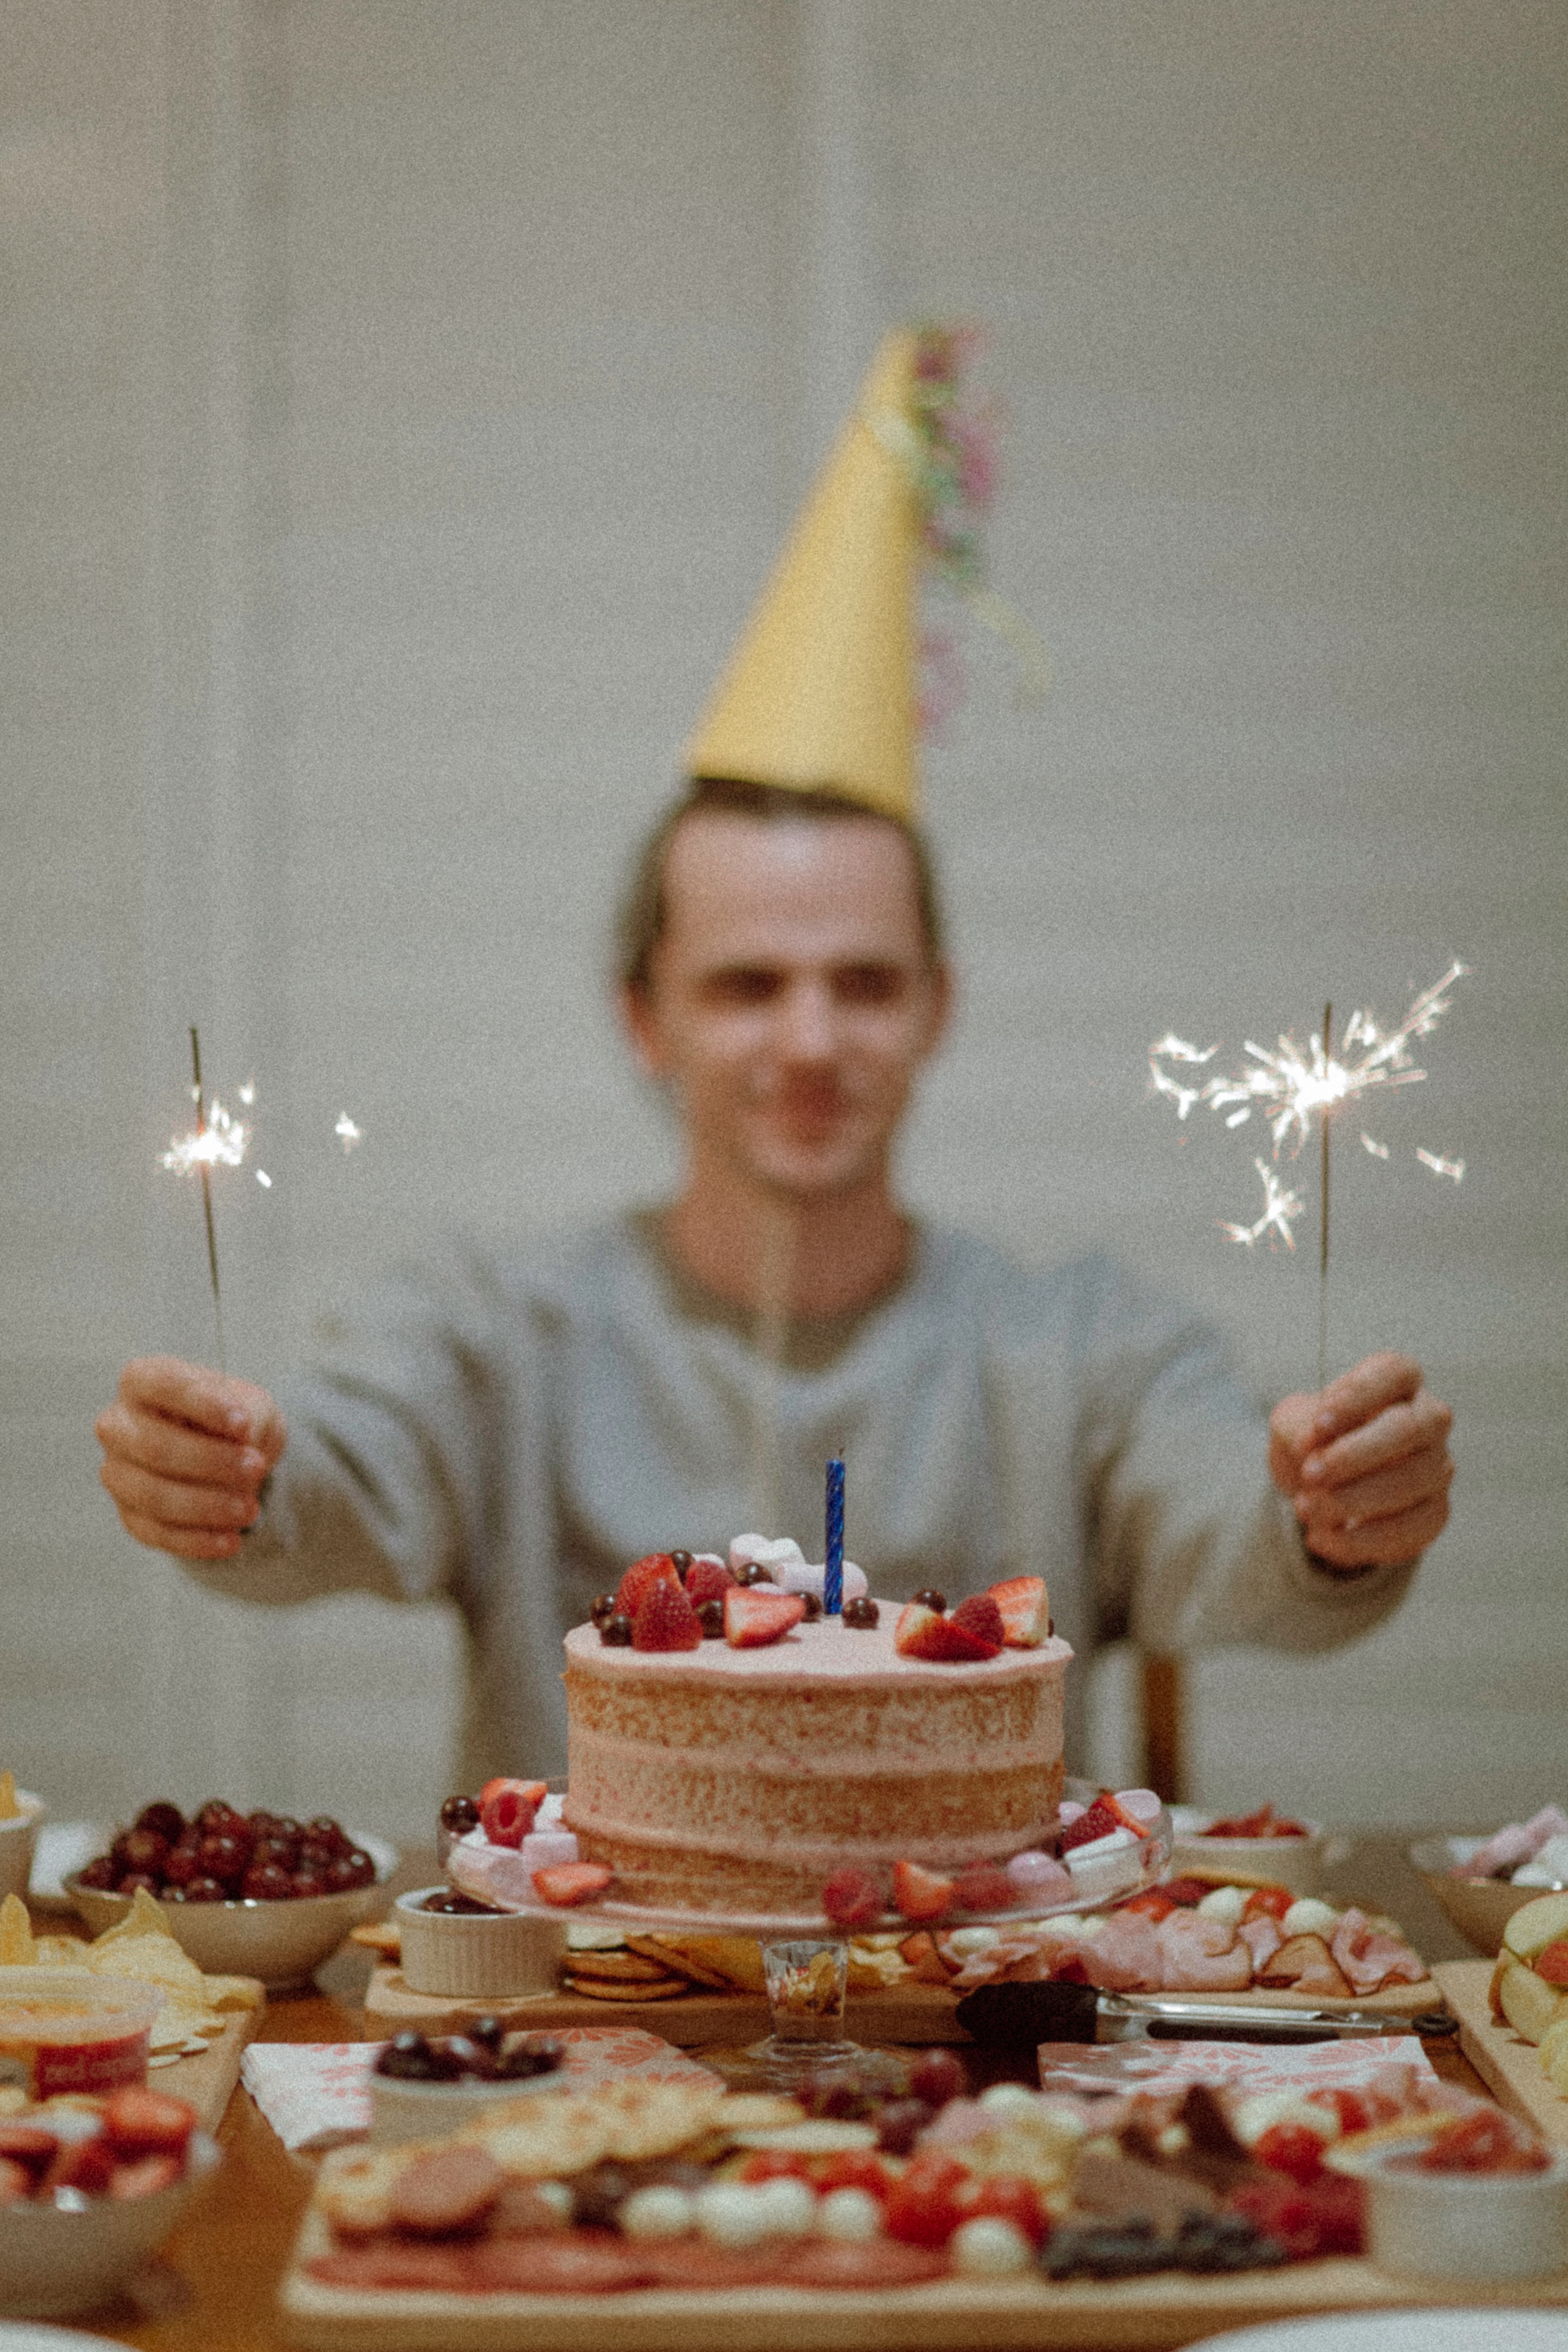 How to Say Happy Birthday in Spanish - Useful Phrases and Traditions